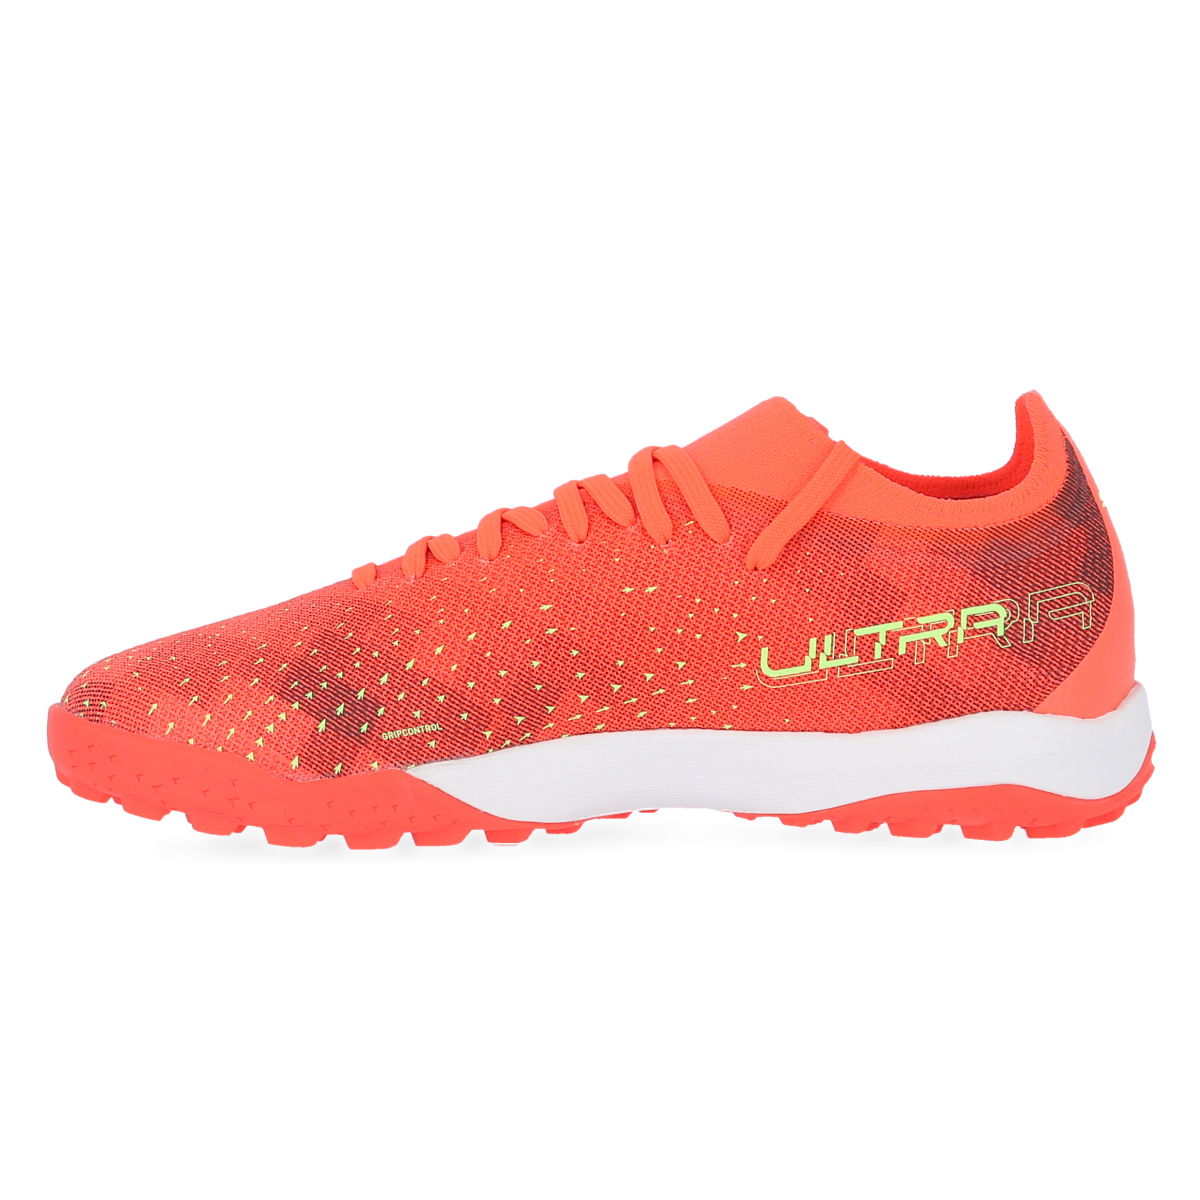 Botines Puma Ultra Match Sintético Hombre,  image number null